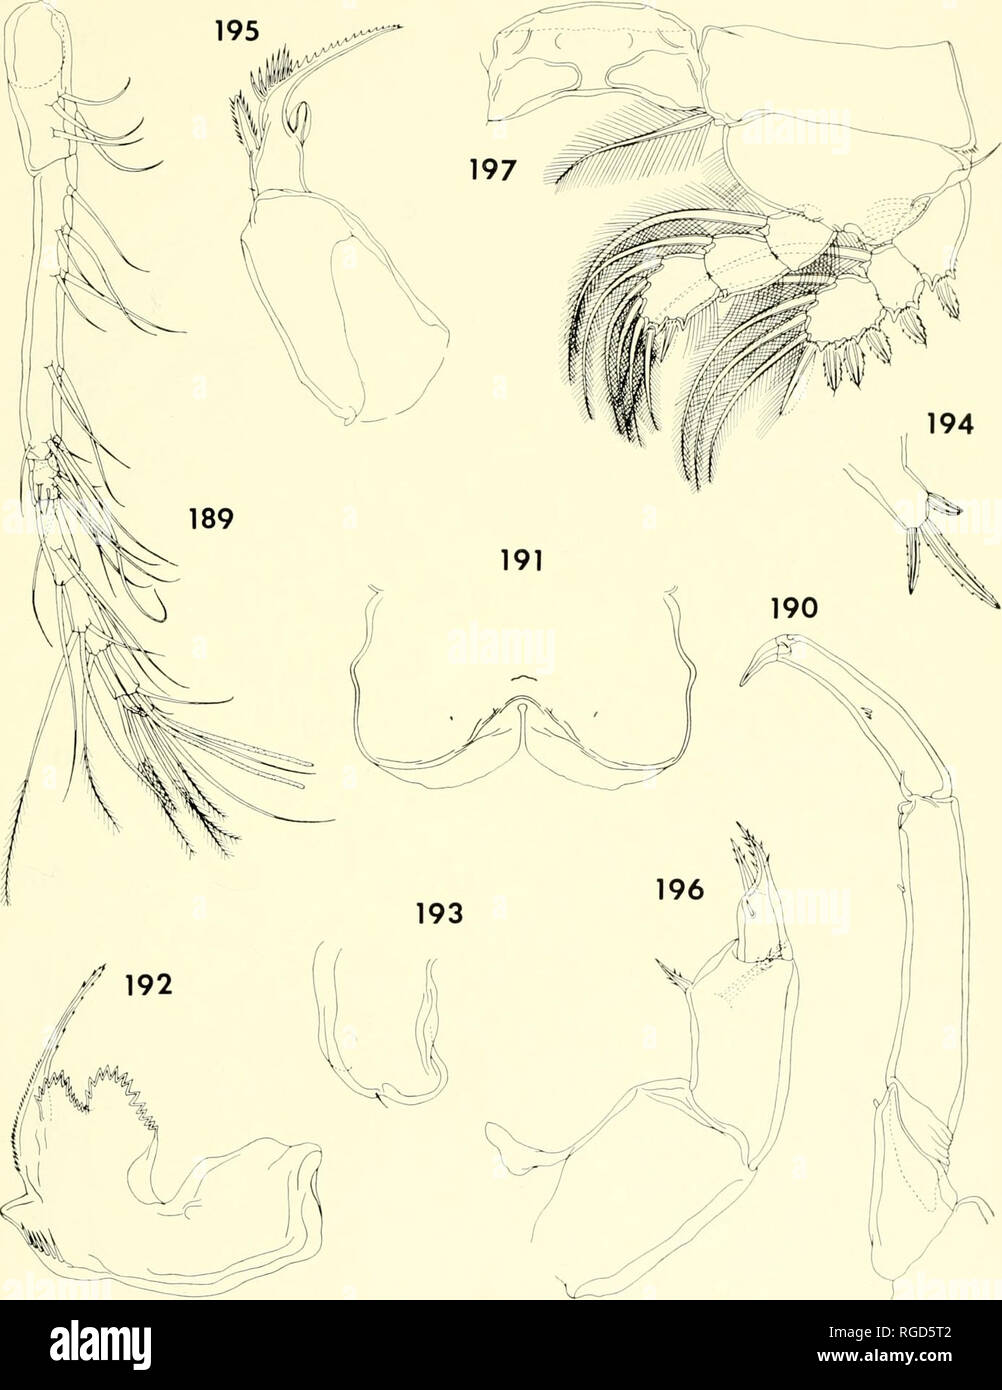 . Bulletin of the Museum of Comparative Zoology at Harvard College. Zoology. CoPEPODS FROM Corals in Madagascar • Hiancs and IIu 405. Figures 189-197. Prionomolgus lanceolatus n. gen., n. sp., female (continued). 189, first antenna, dorsal (E); 190, sec- ond antenna, posterior (E); 191, labrum, ventral (D); 192, mandible, posterior (F); 193, paragnath, posterior (I); 194, first maxilla, posterior (F); 195, second maxilla, anterior (D); 196, maxilliped, outer (F); 197, leg 1 and intercoxal plate, anterior (E).. Please note that these images are extracted from scanned page images that may have b Stock Photo